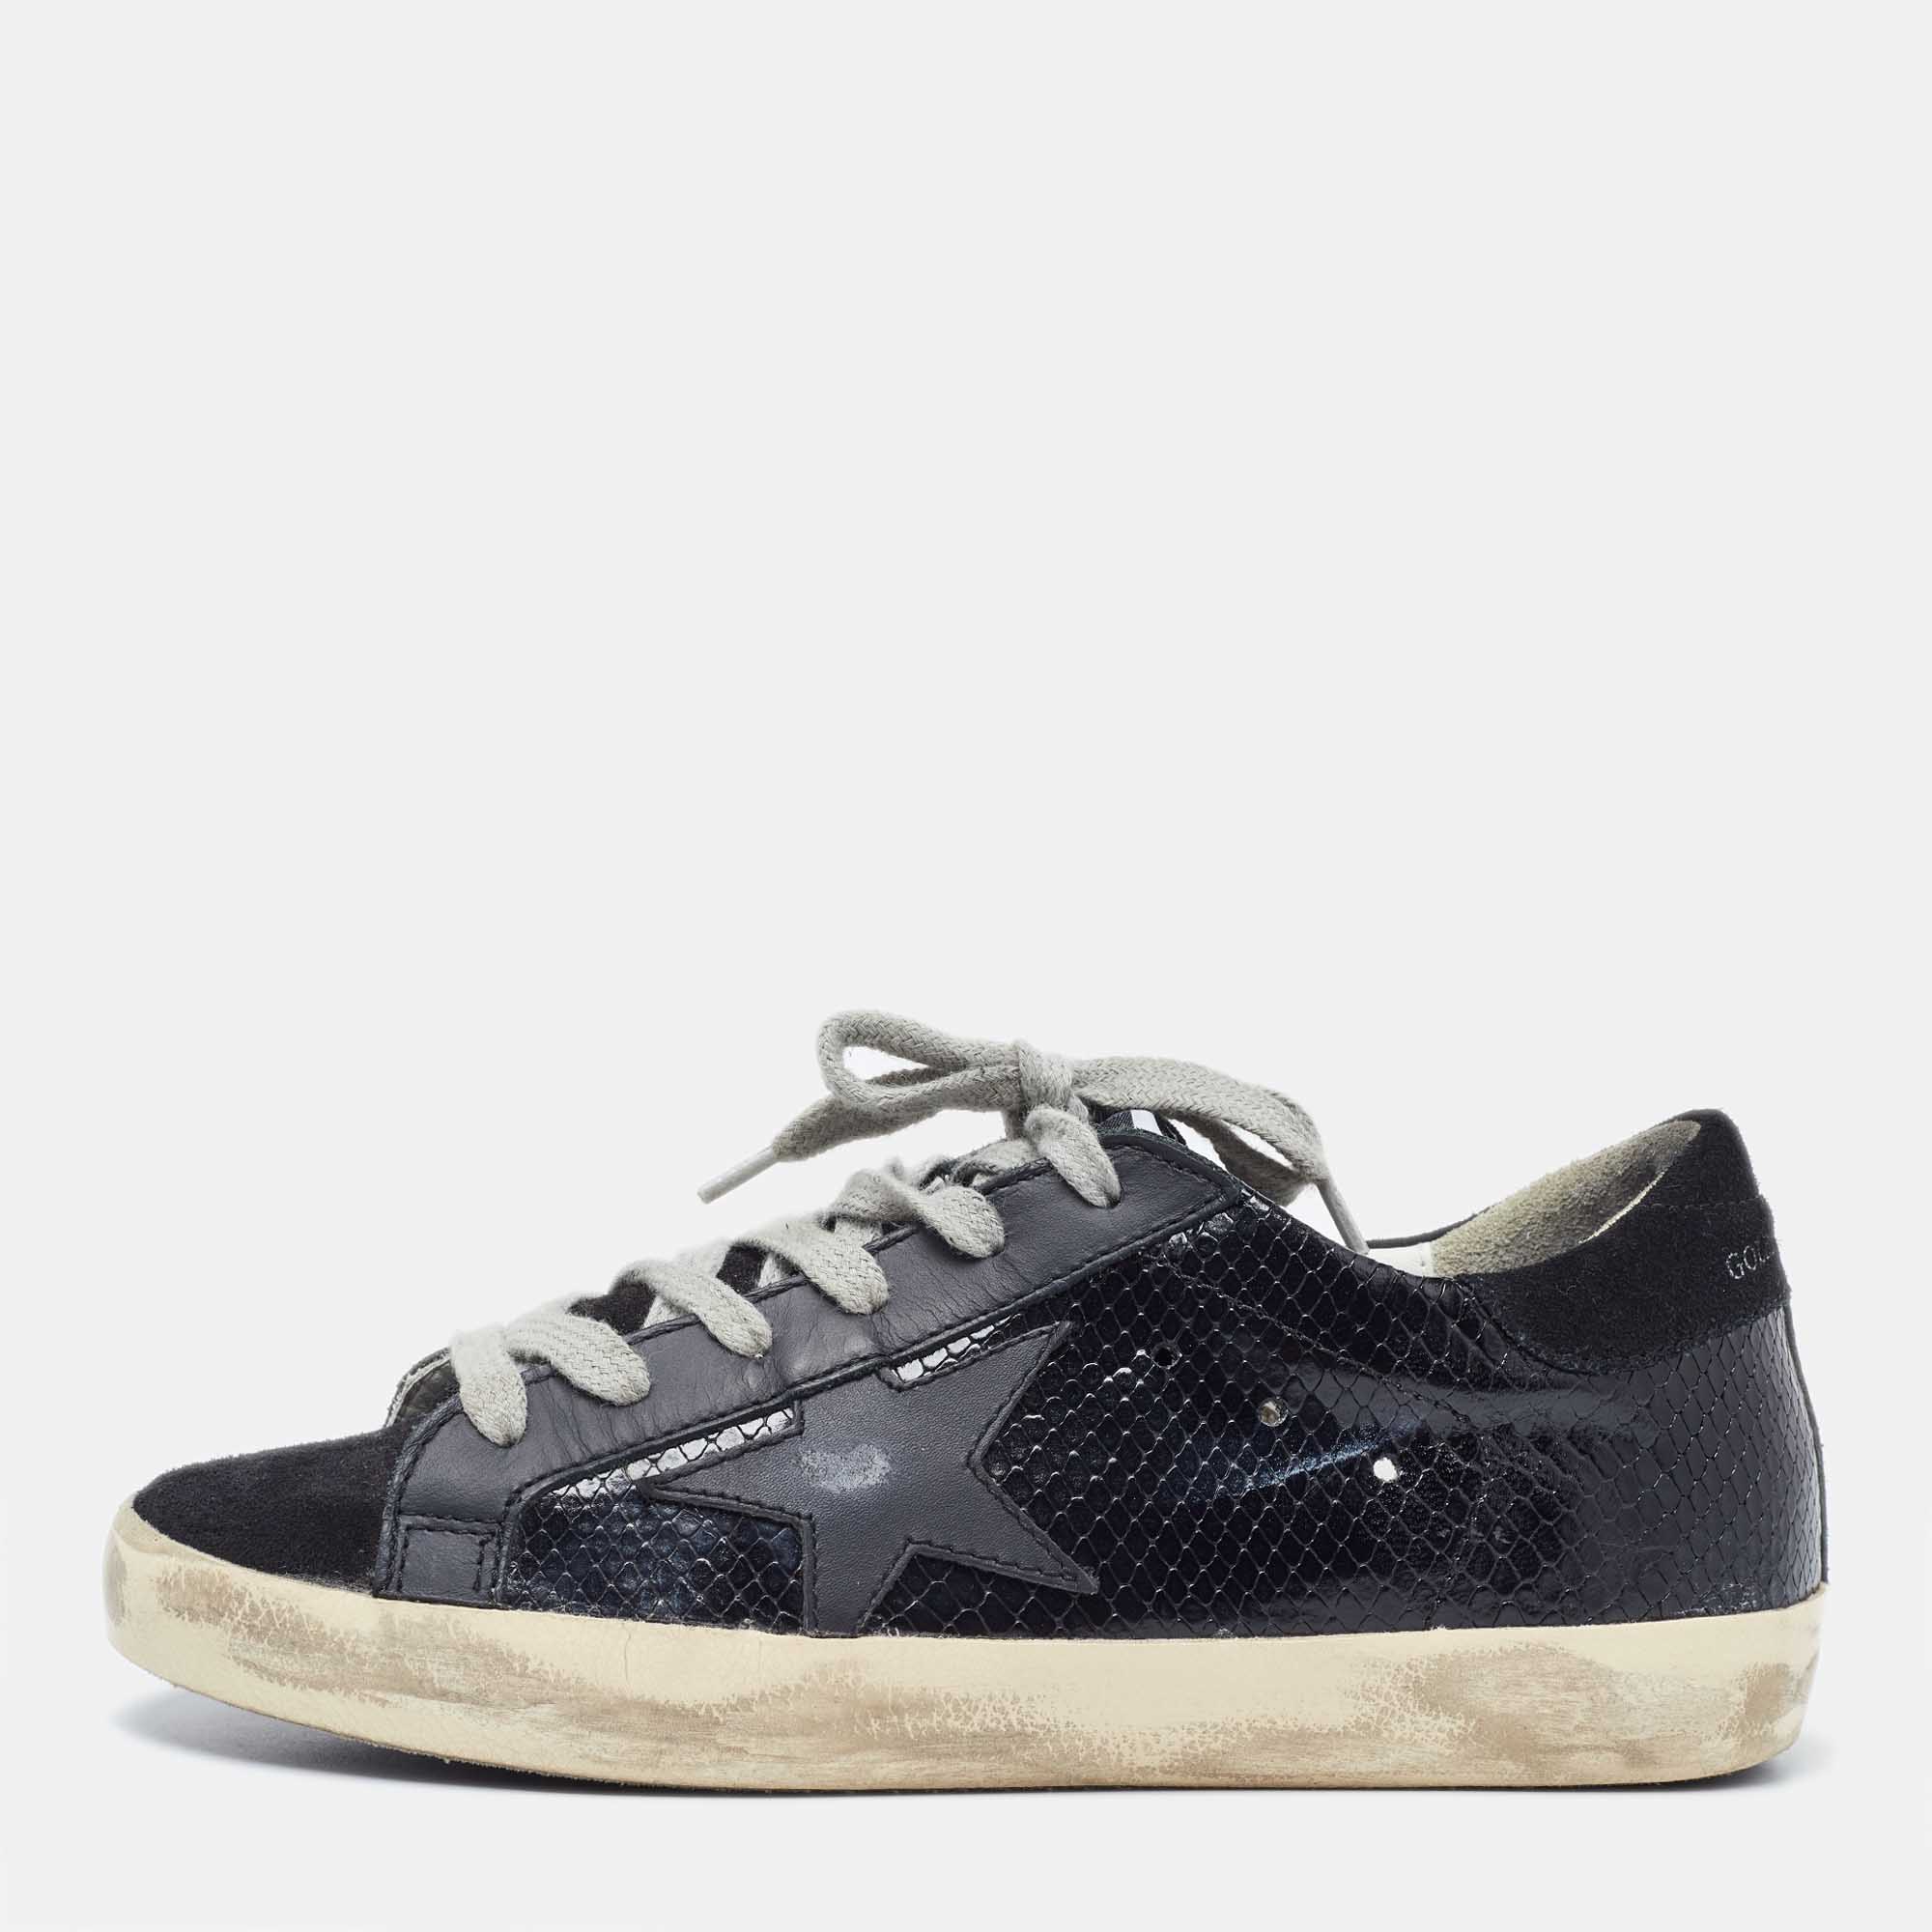 

Golden Goose Black Suede and Python Embossed Leather Hi Star Low Top Sneakers Size